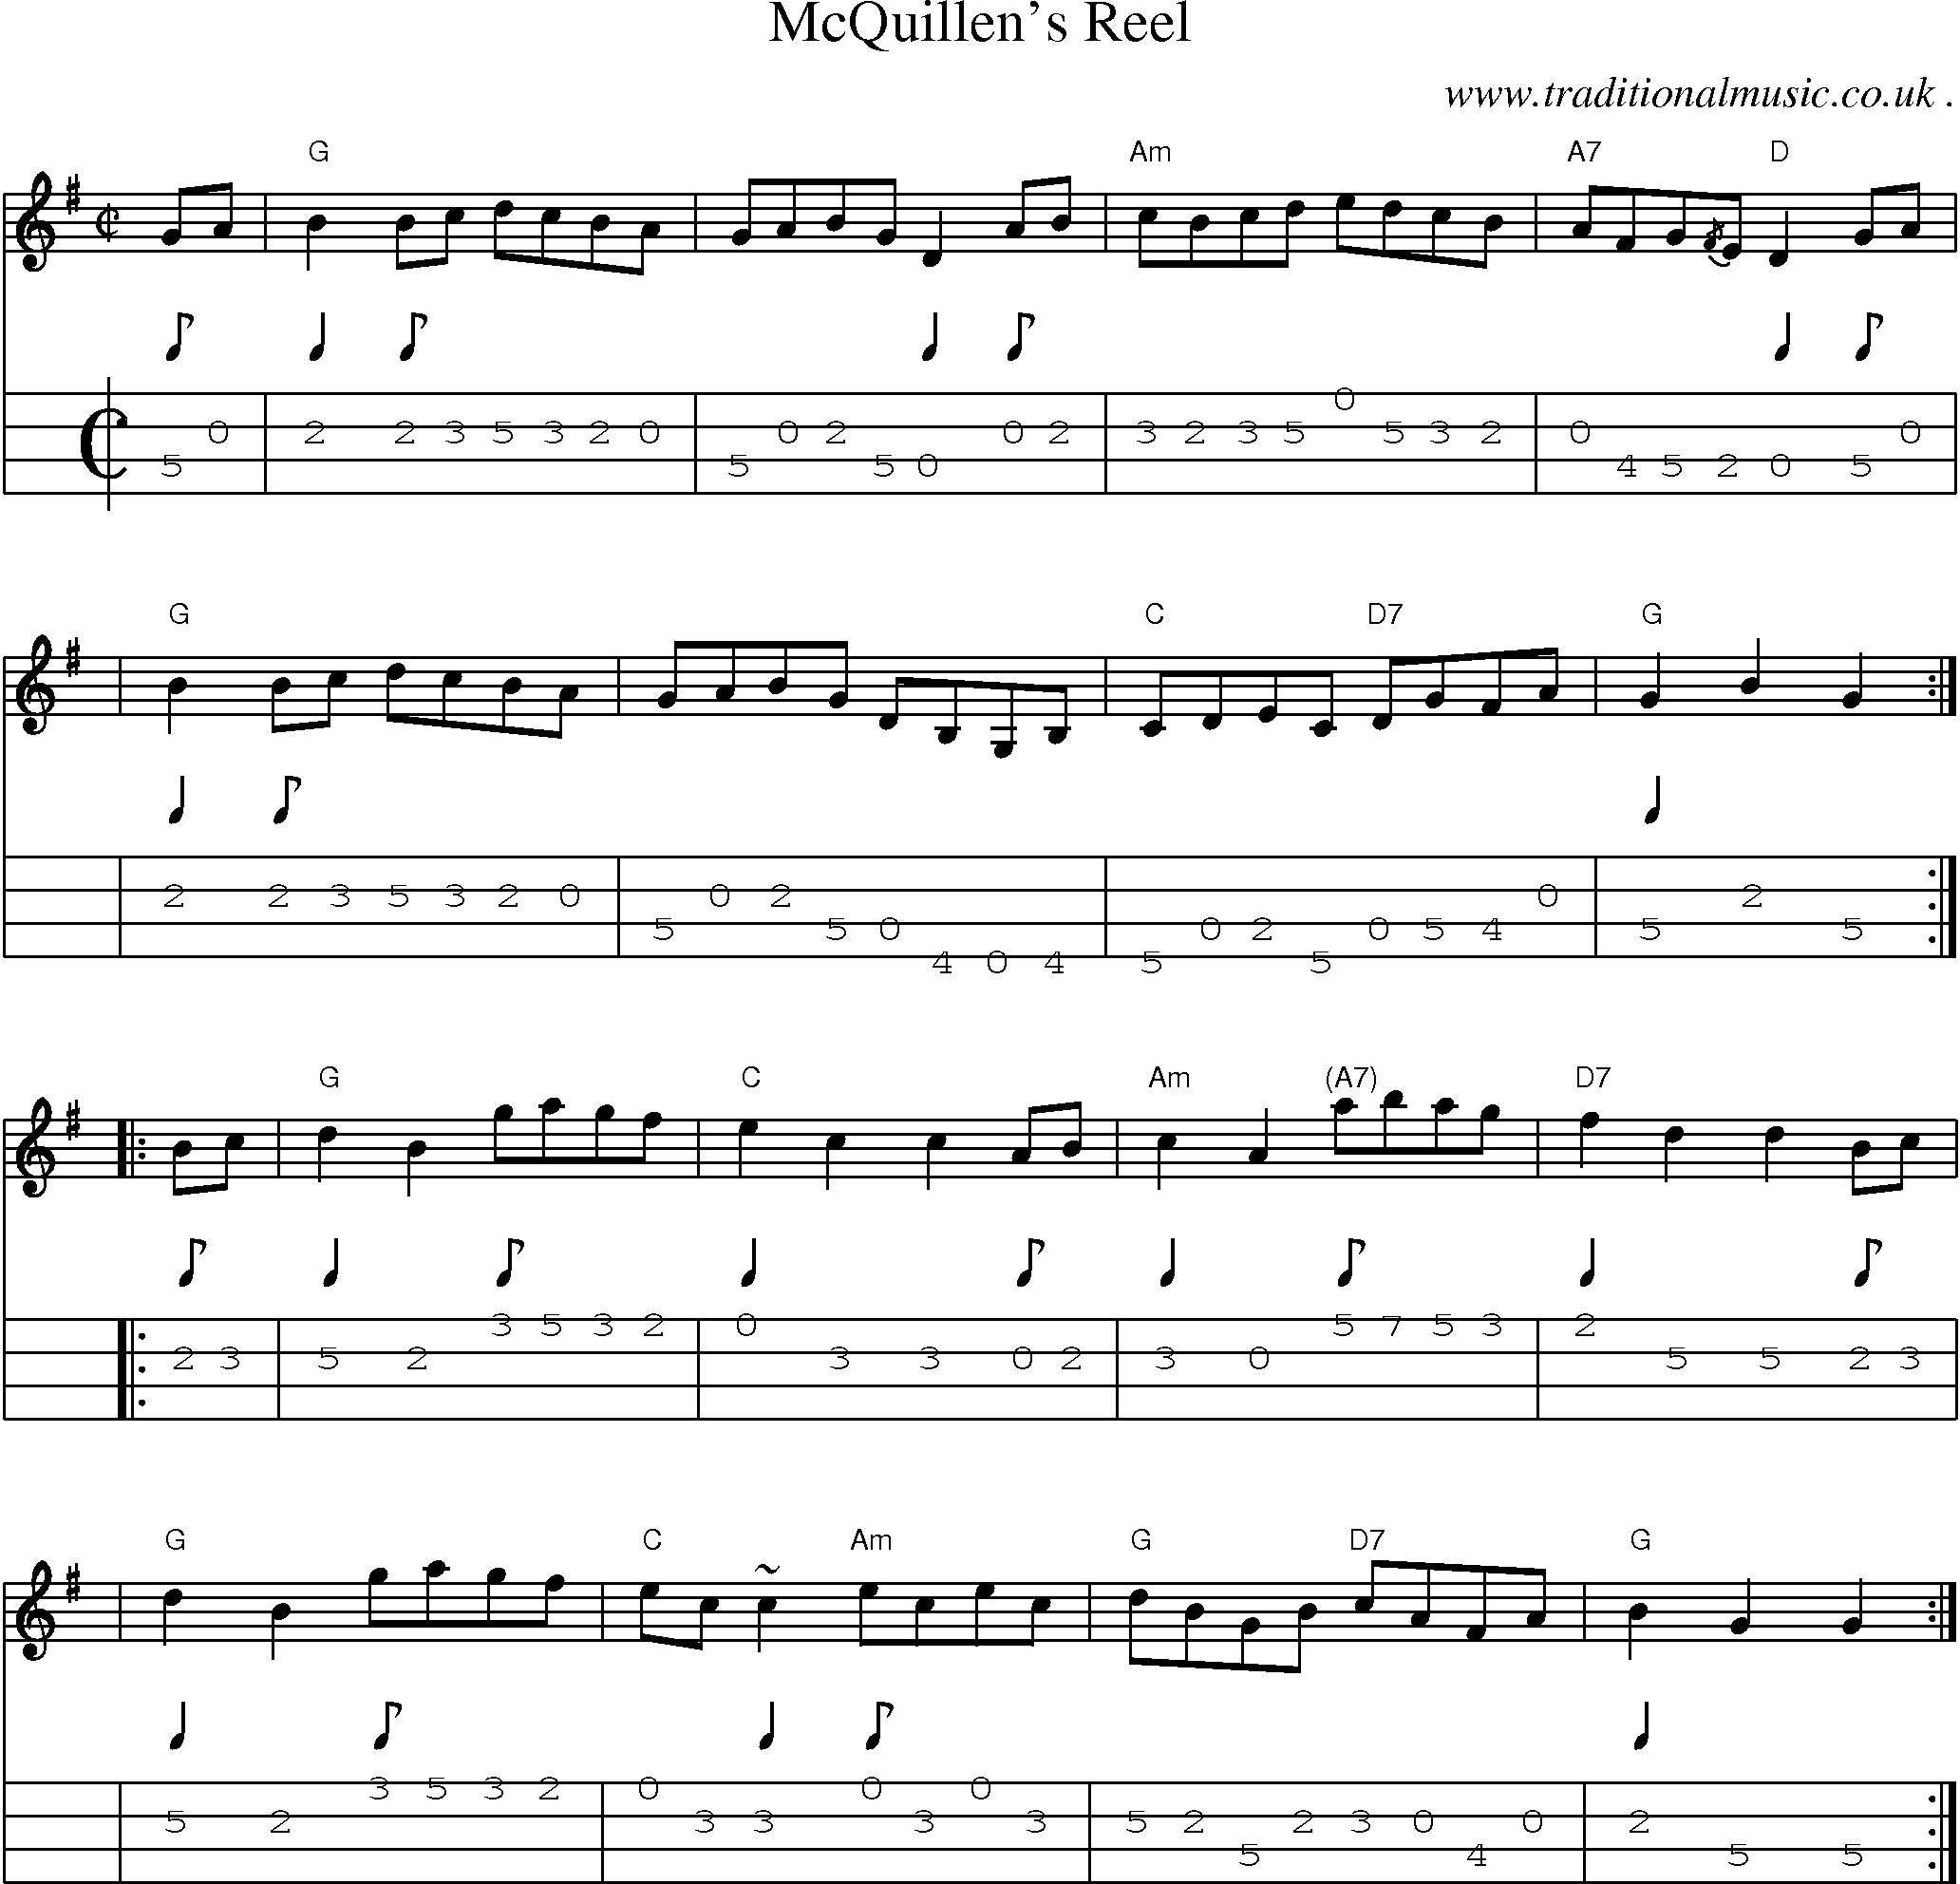 Sheet-music  score, Chords and Mandolin Tabs for Mcquillens Reel